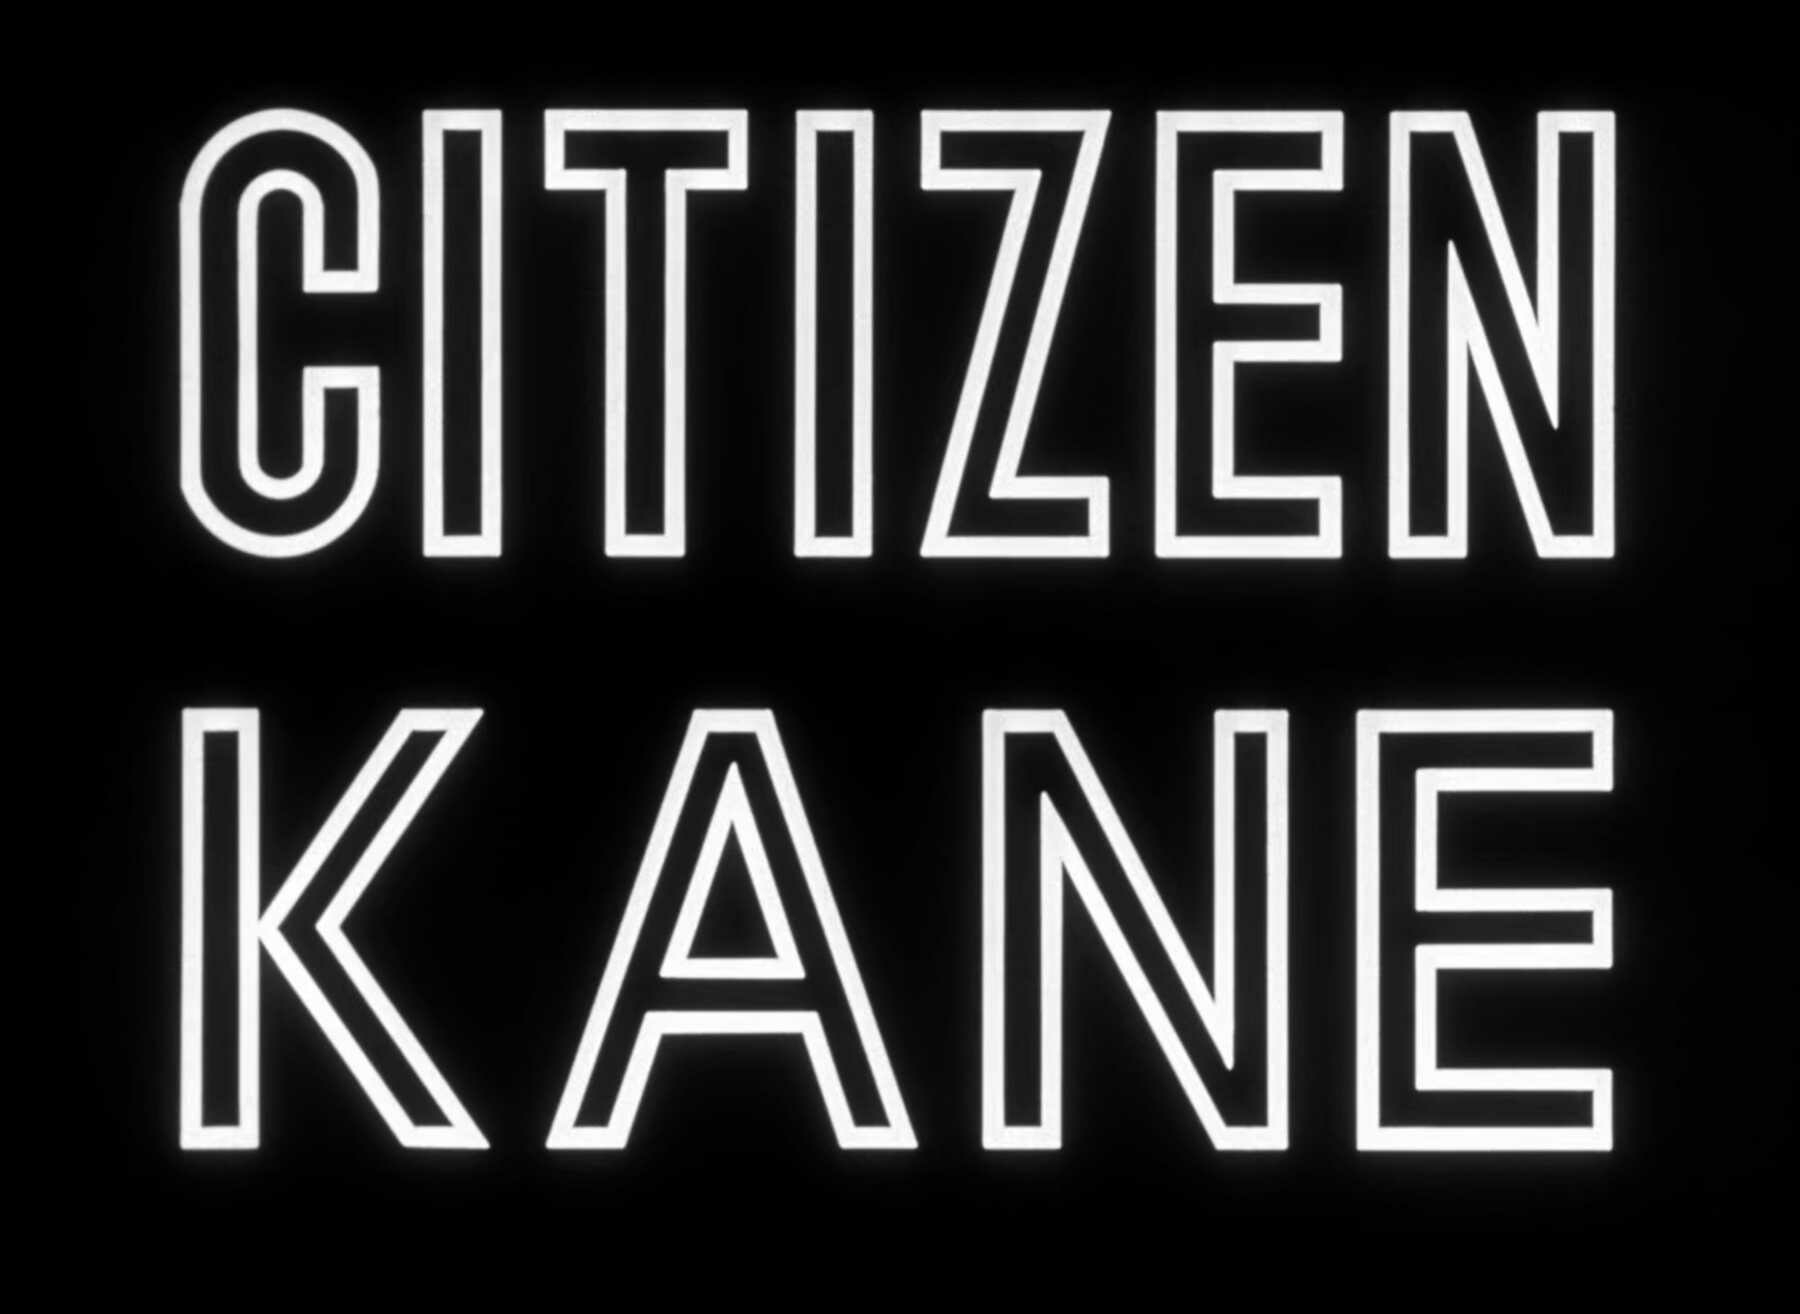 The title card for the film, Citizen Kane.